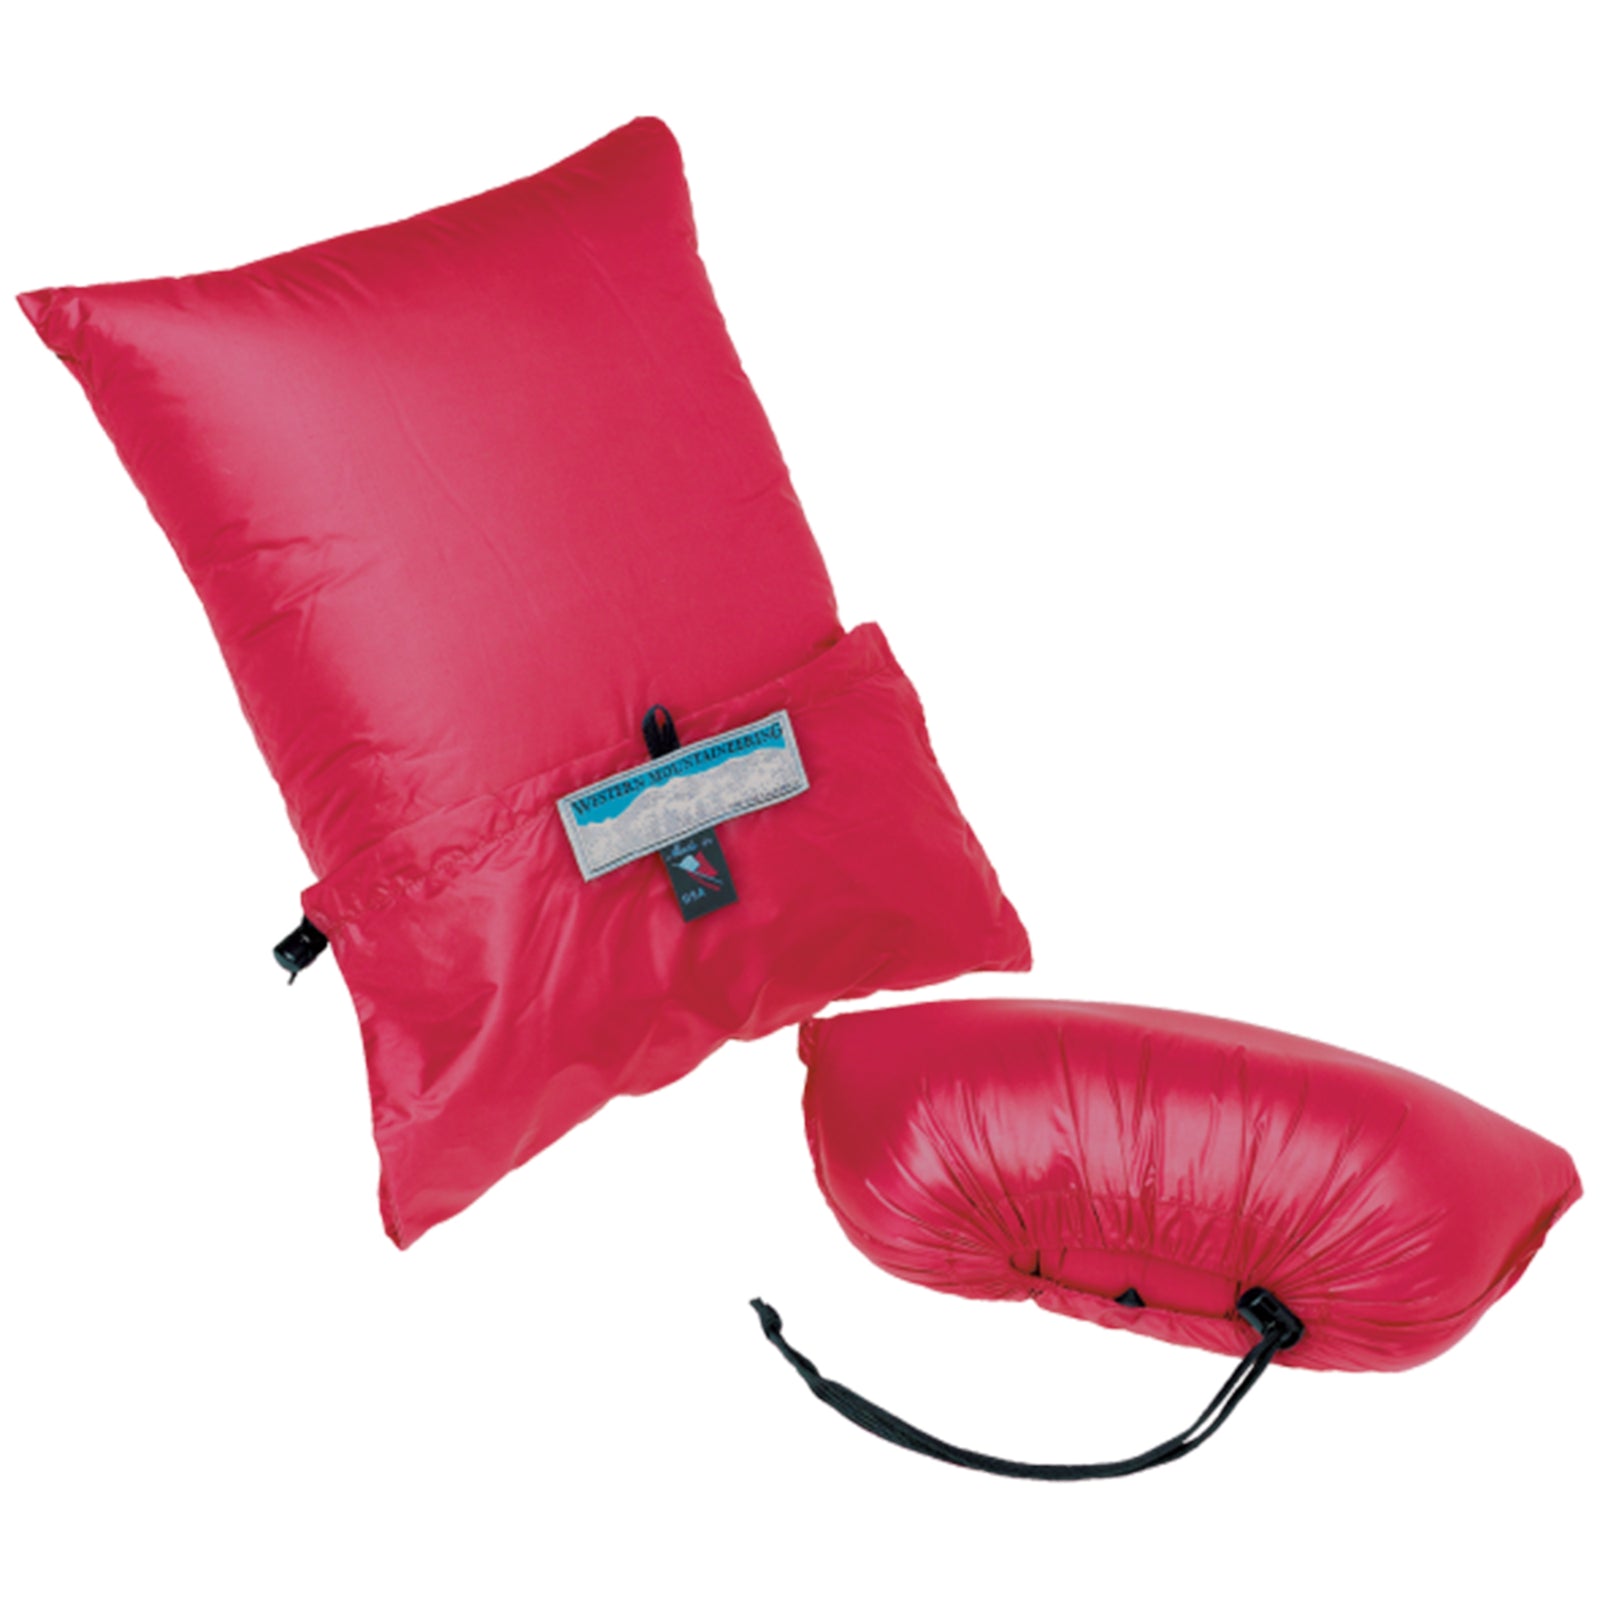 CLOUDREST DOWN PILLOW FULLY EXPANDED AND FULLY STUFFED IN RED